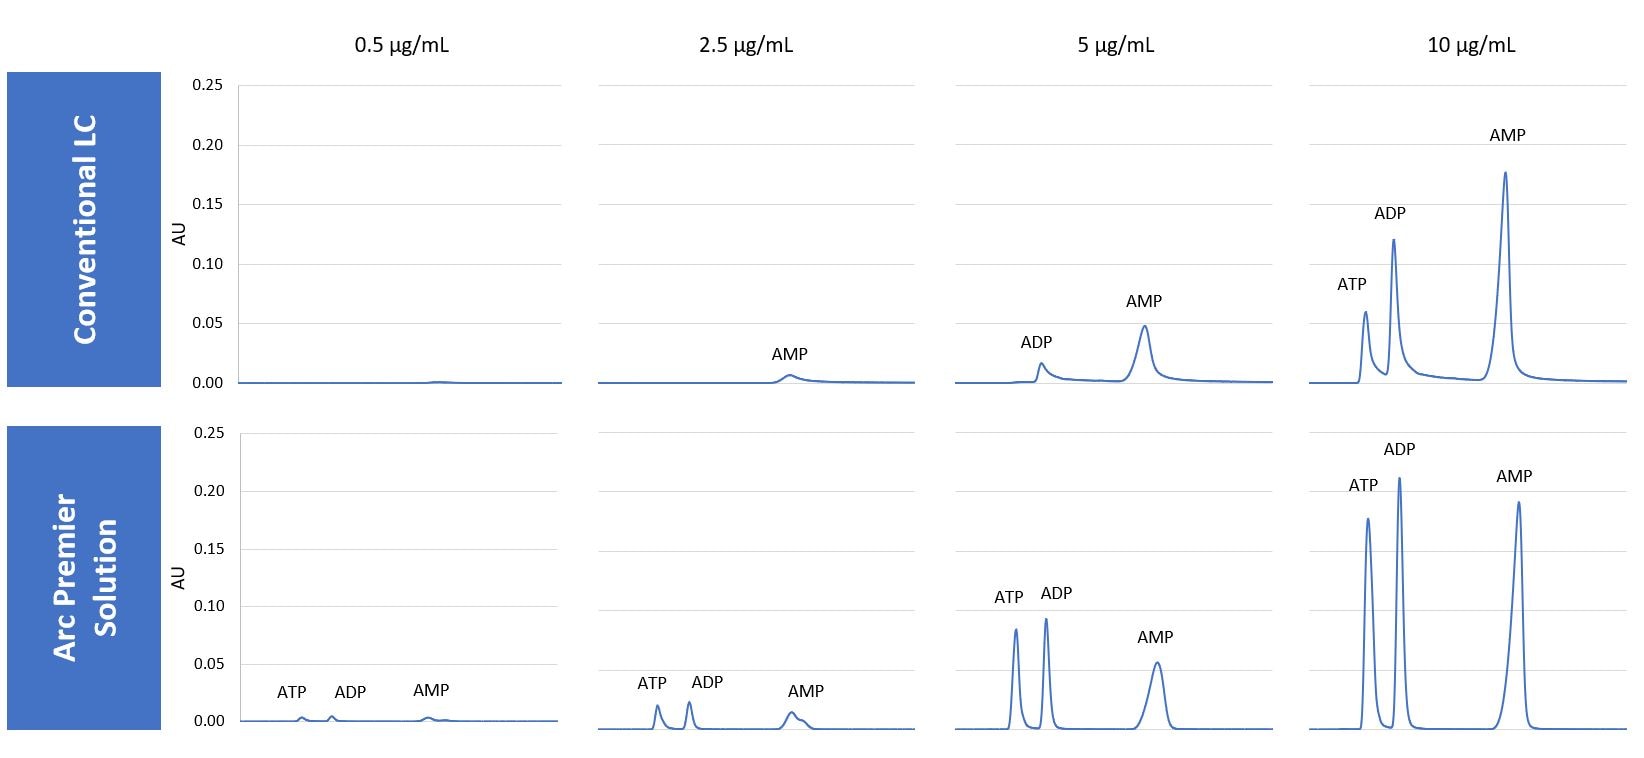 Analysis of adenosine monophosphate, adenosine diphosphate, and adenosine triphosphate. Significant improvements to sensitivity and recovery are observed with the Arc Premier Solution compared to a conventional LC system.